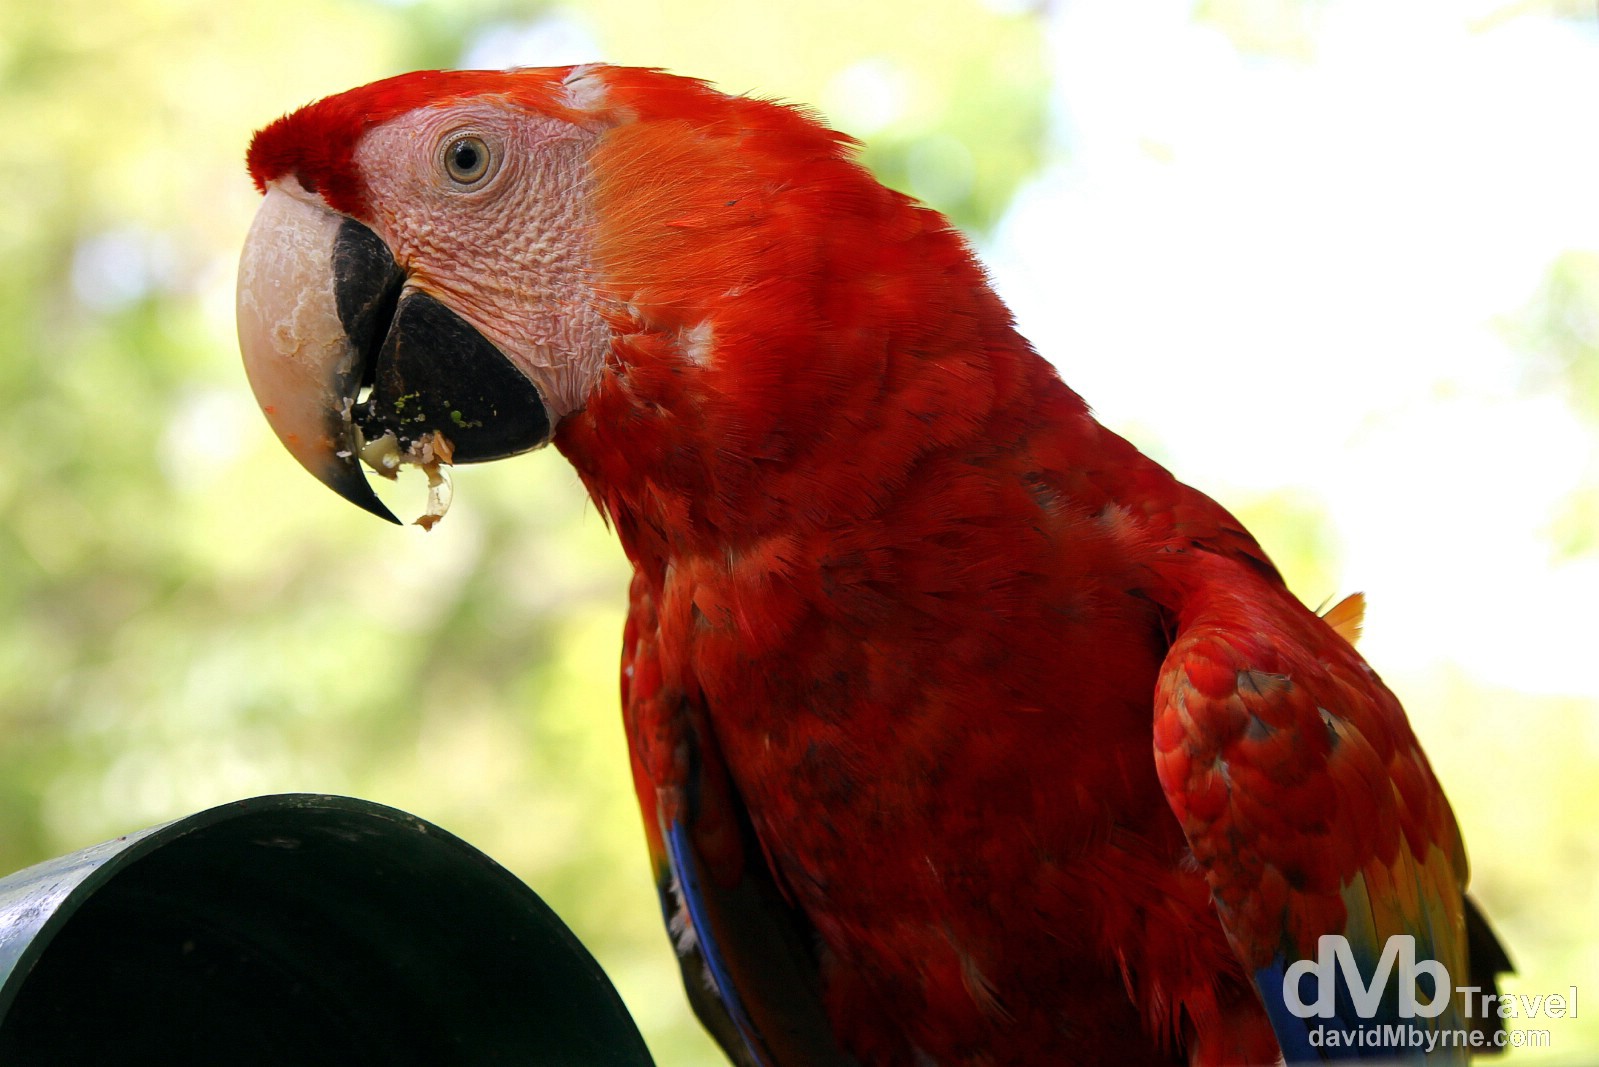 A scarlet Macaw in the grounds of the Copan Architectural Site, western Honduras. June 7th 2013.